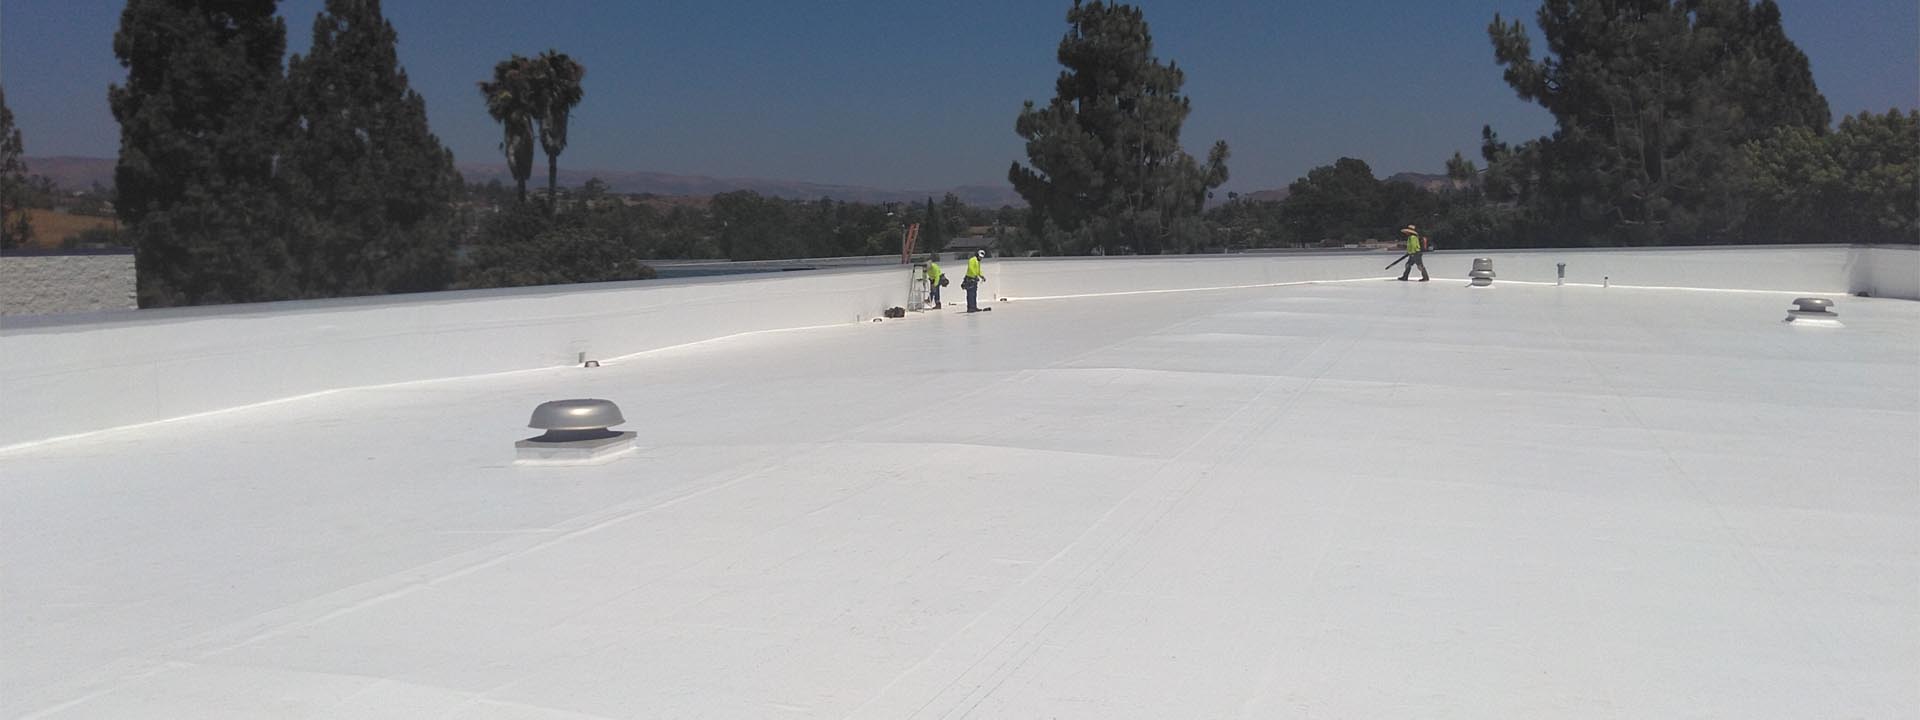 Commercial Roofing Contractor Services - Los Angeles Maintenance